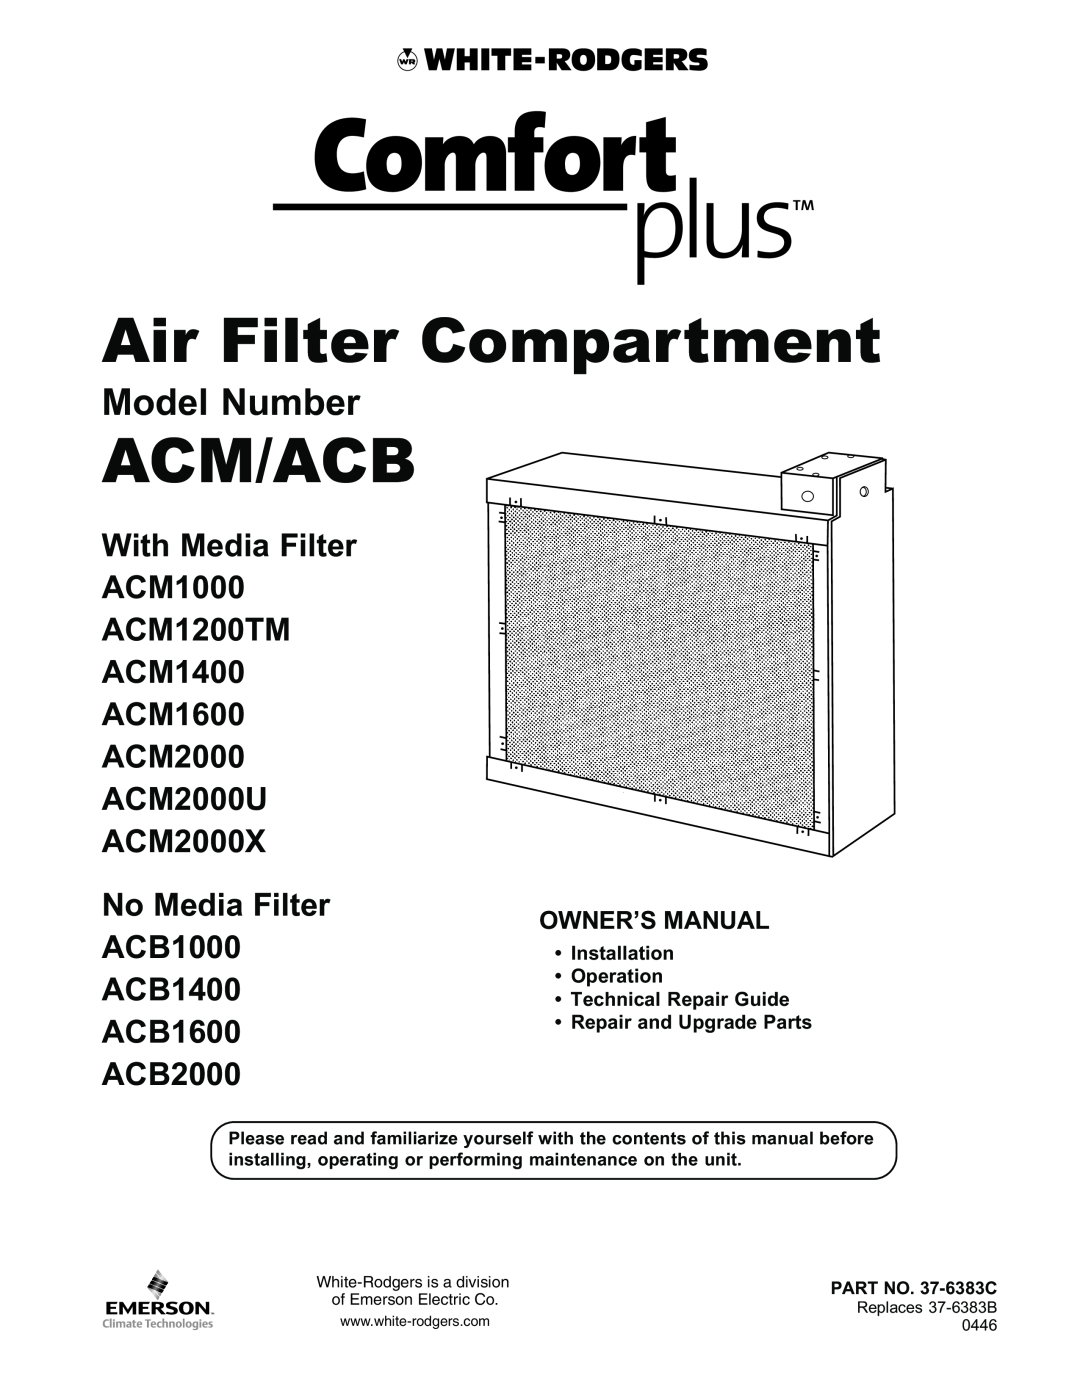 White Rodgers pmnACM/ACB owner manual Air Filter Compartment, Acm/Acb, Model Number, Repair and Upgrade Parts 